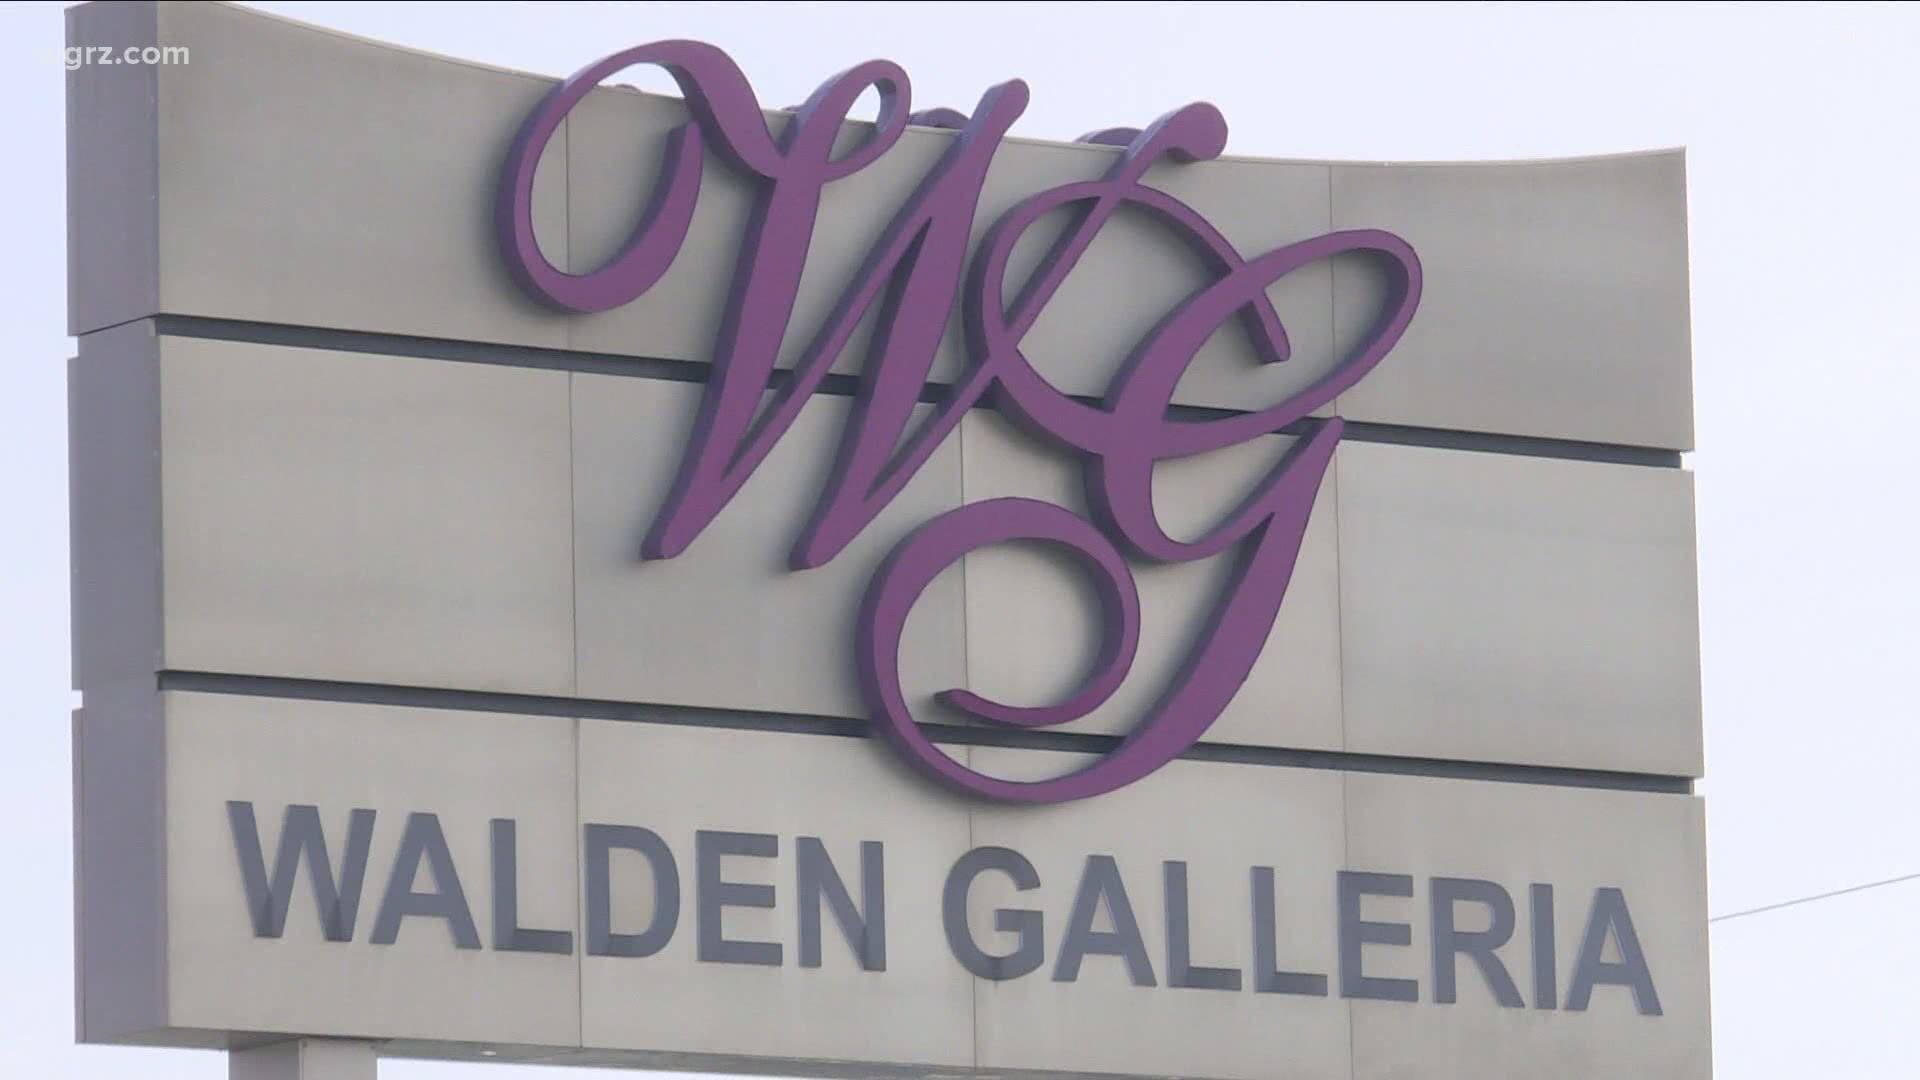 Galleria returns to normal hours Monday